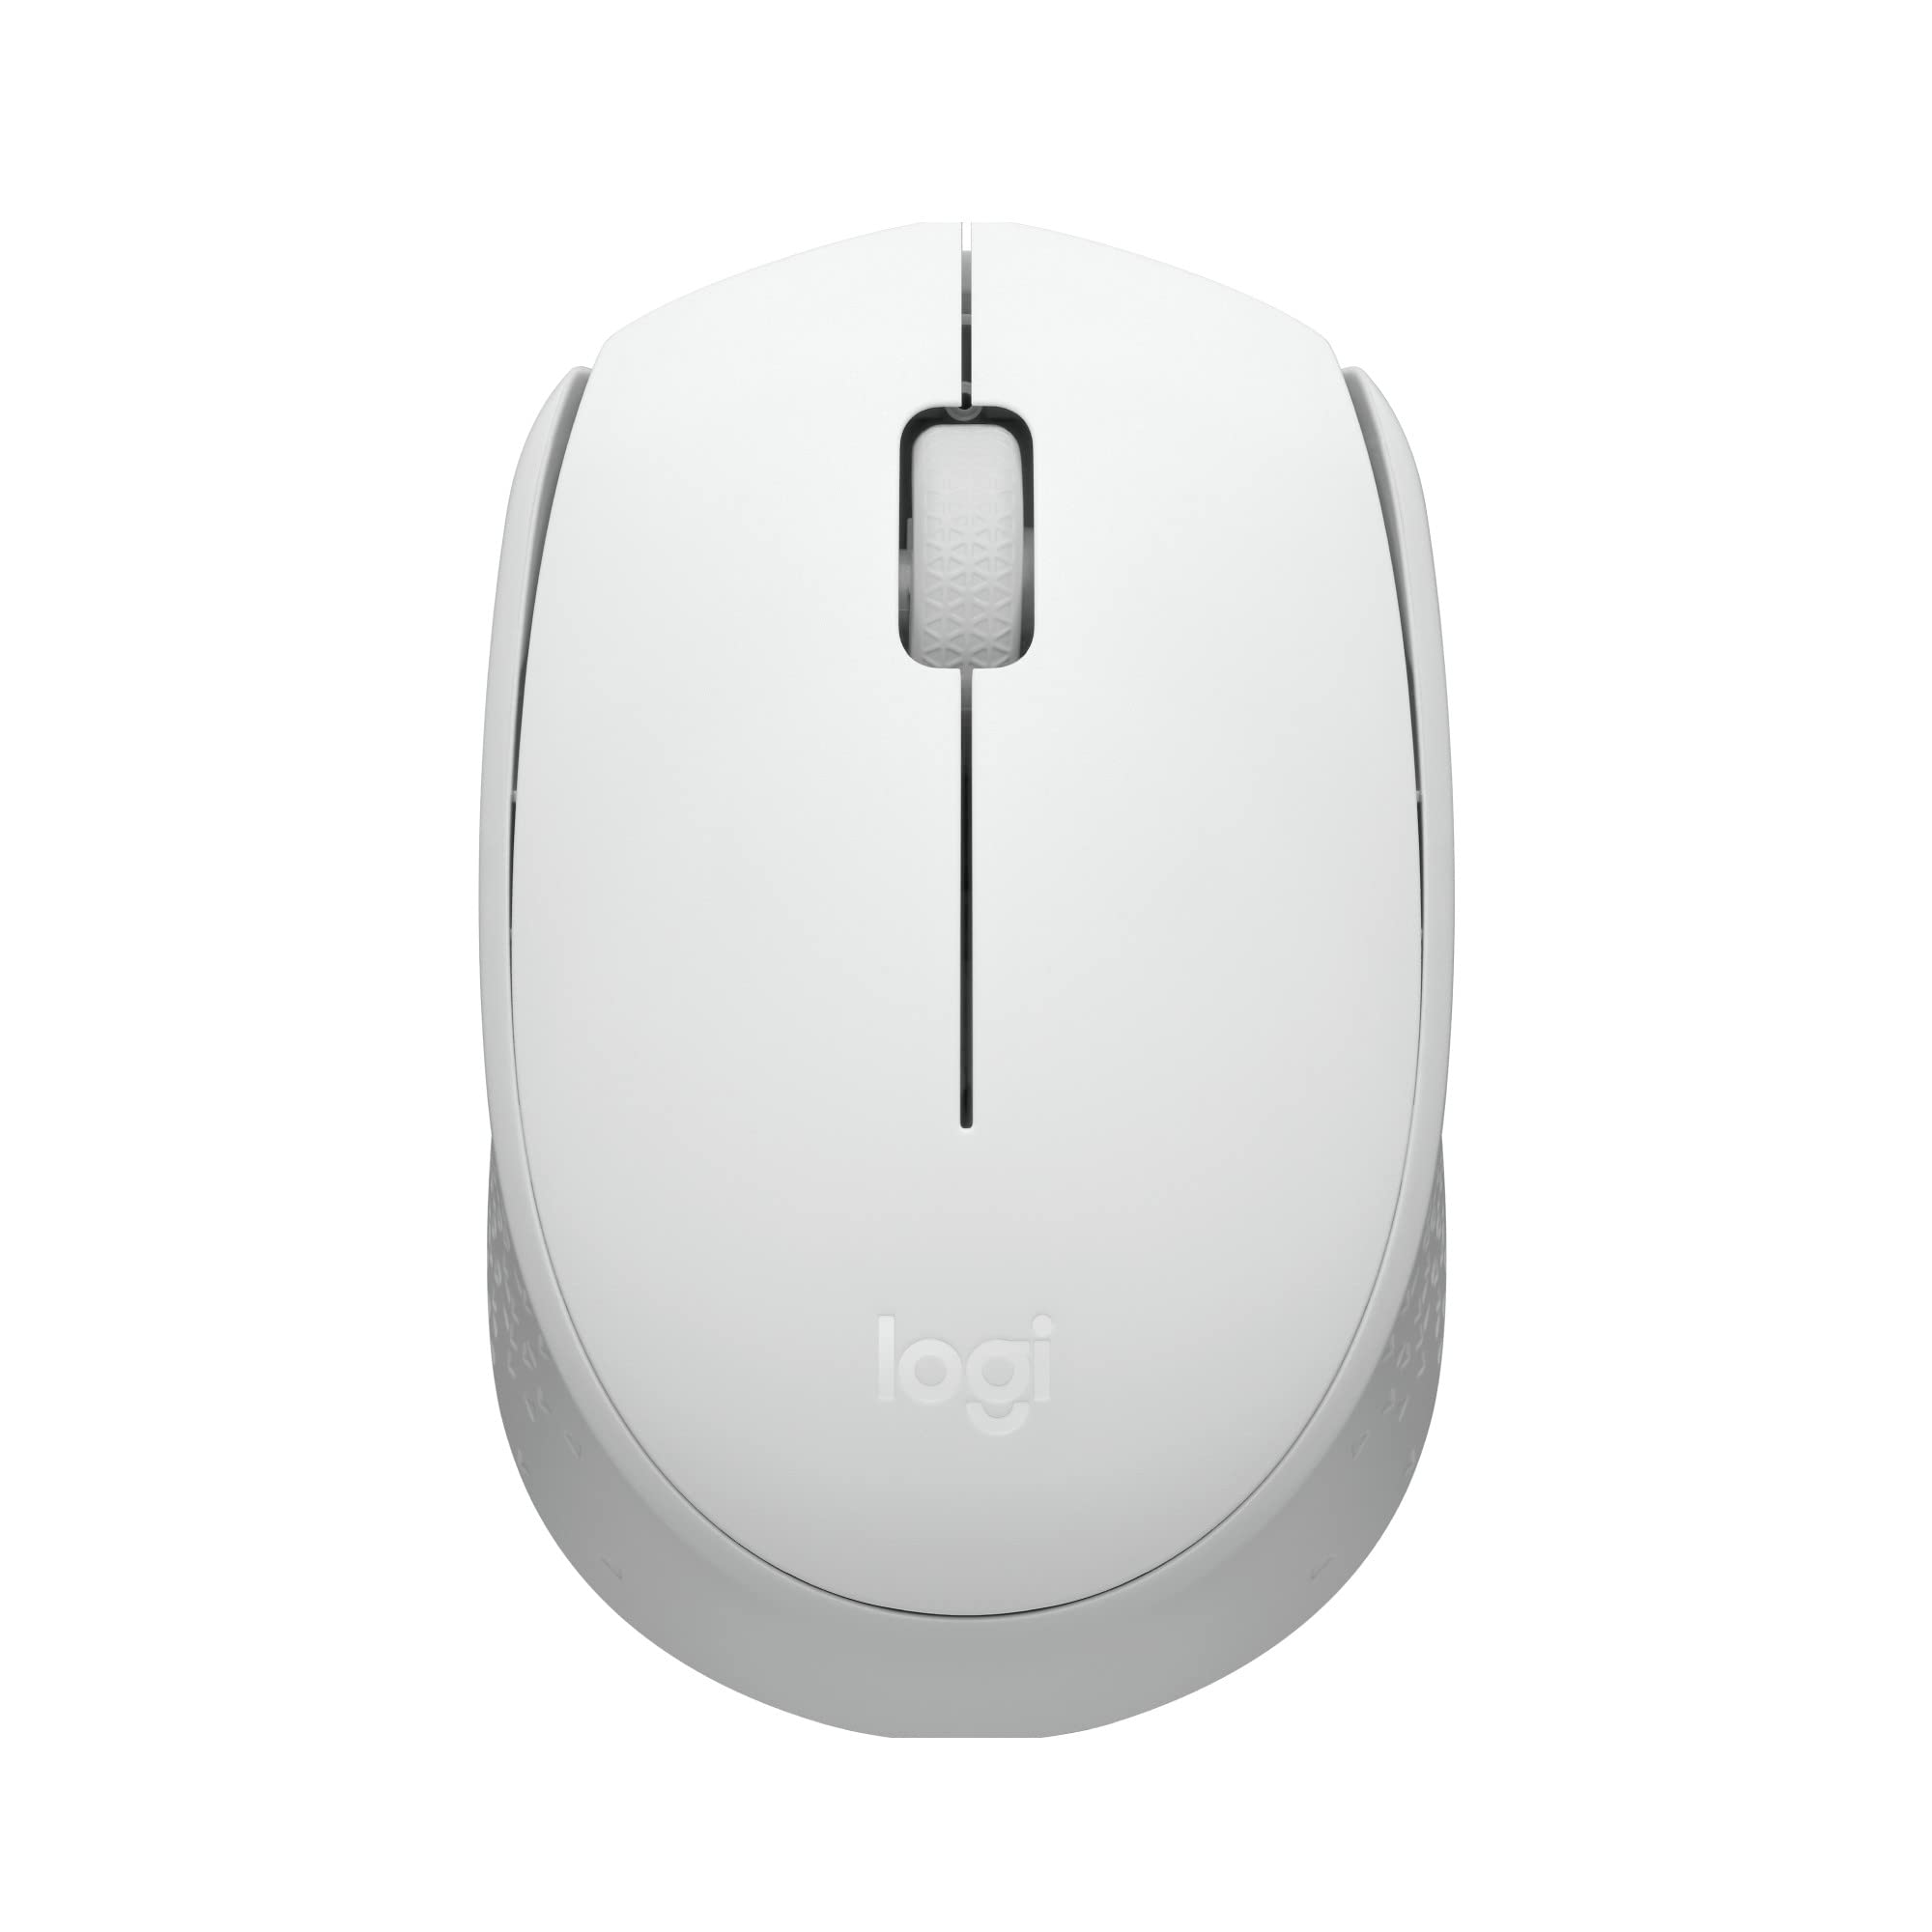 M171 WIRELESS MOUSE - OFF WHITE